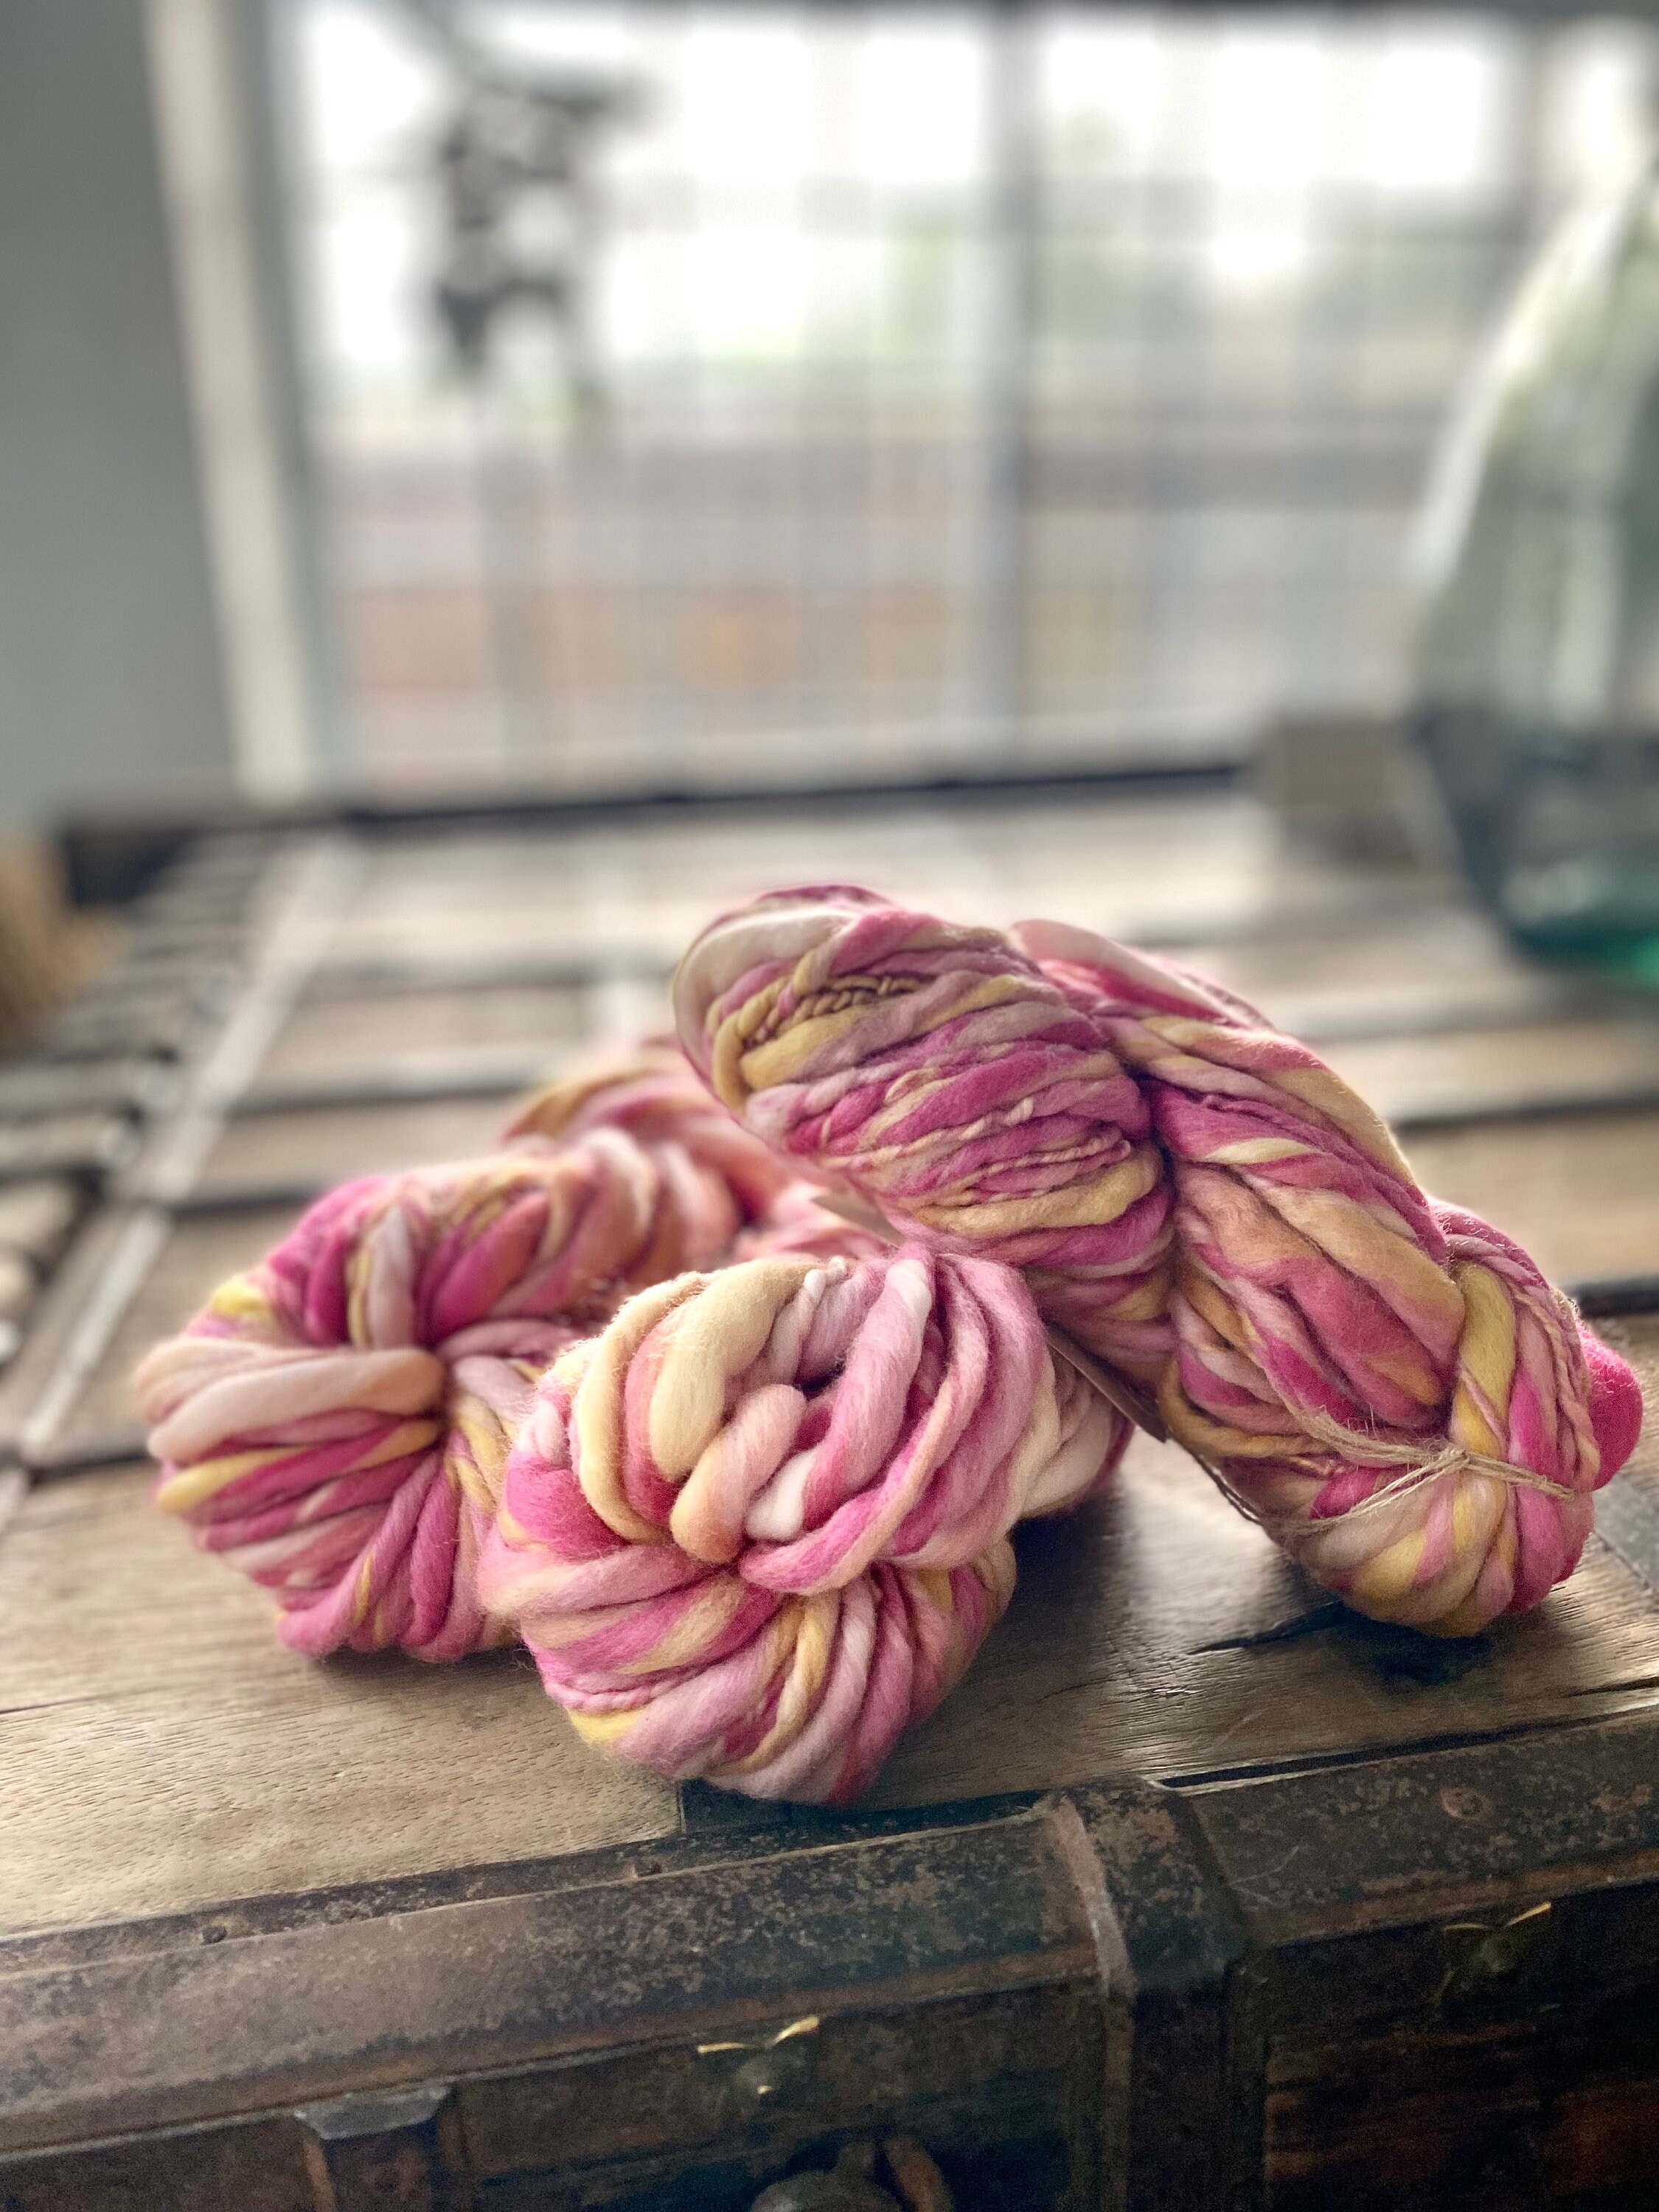 Pink and White Blend Yarn, Knitting or Crocheting Yarn, Loops and